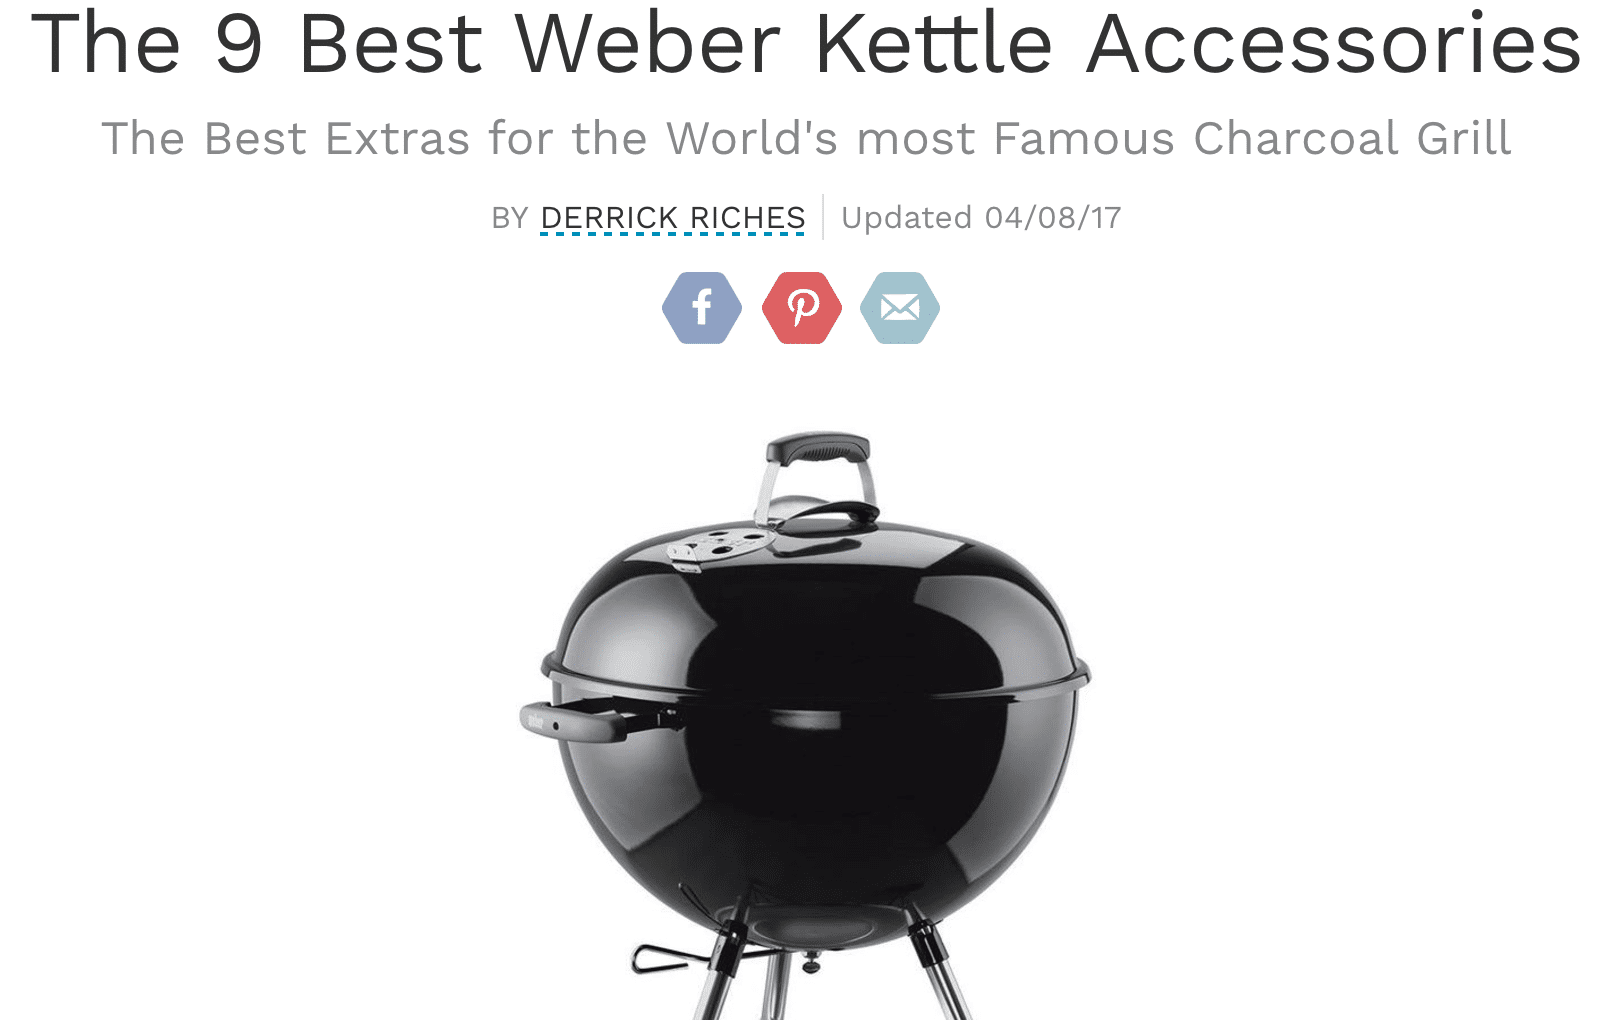 KettlePizza and Smokenator Tope Weber Kettle Accessories